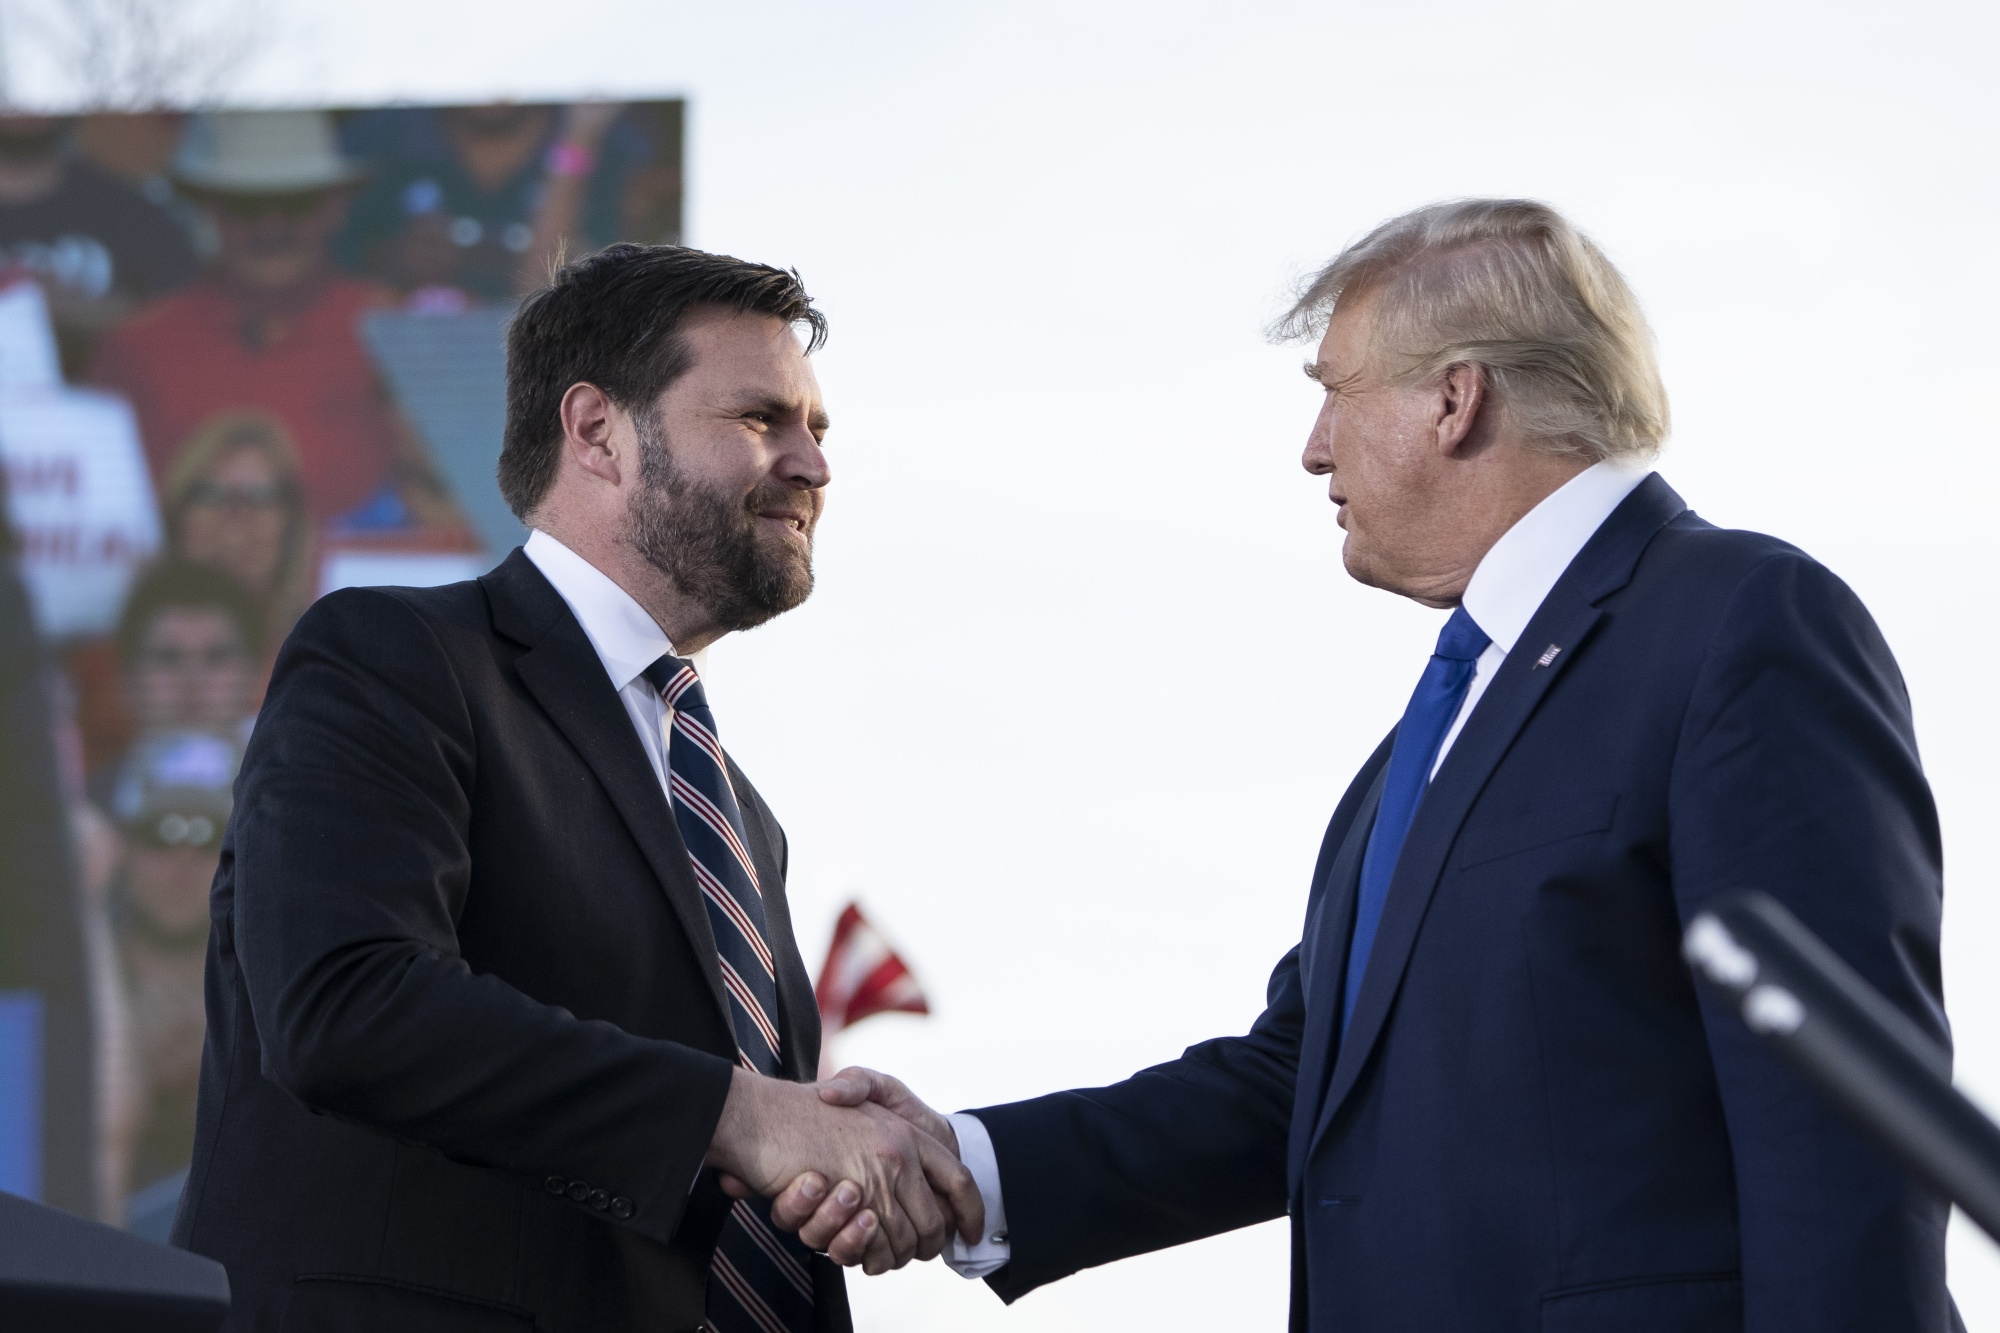 Who is JD Vance, Donald Trump’s Vice Presidential Candidate? – Learn All About Him Here